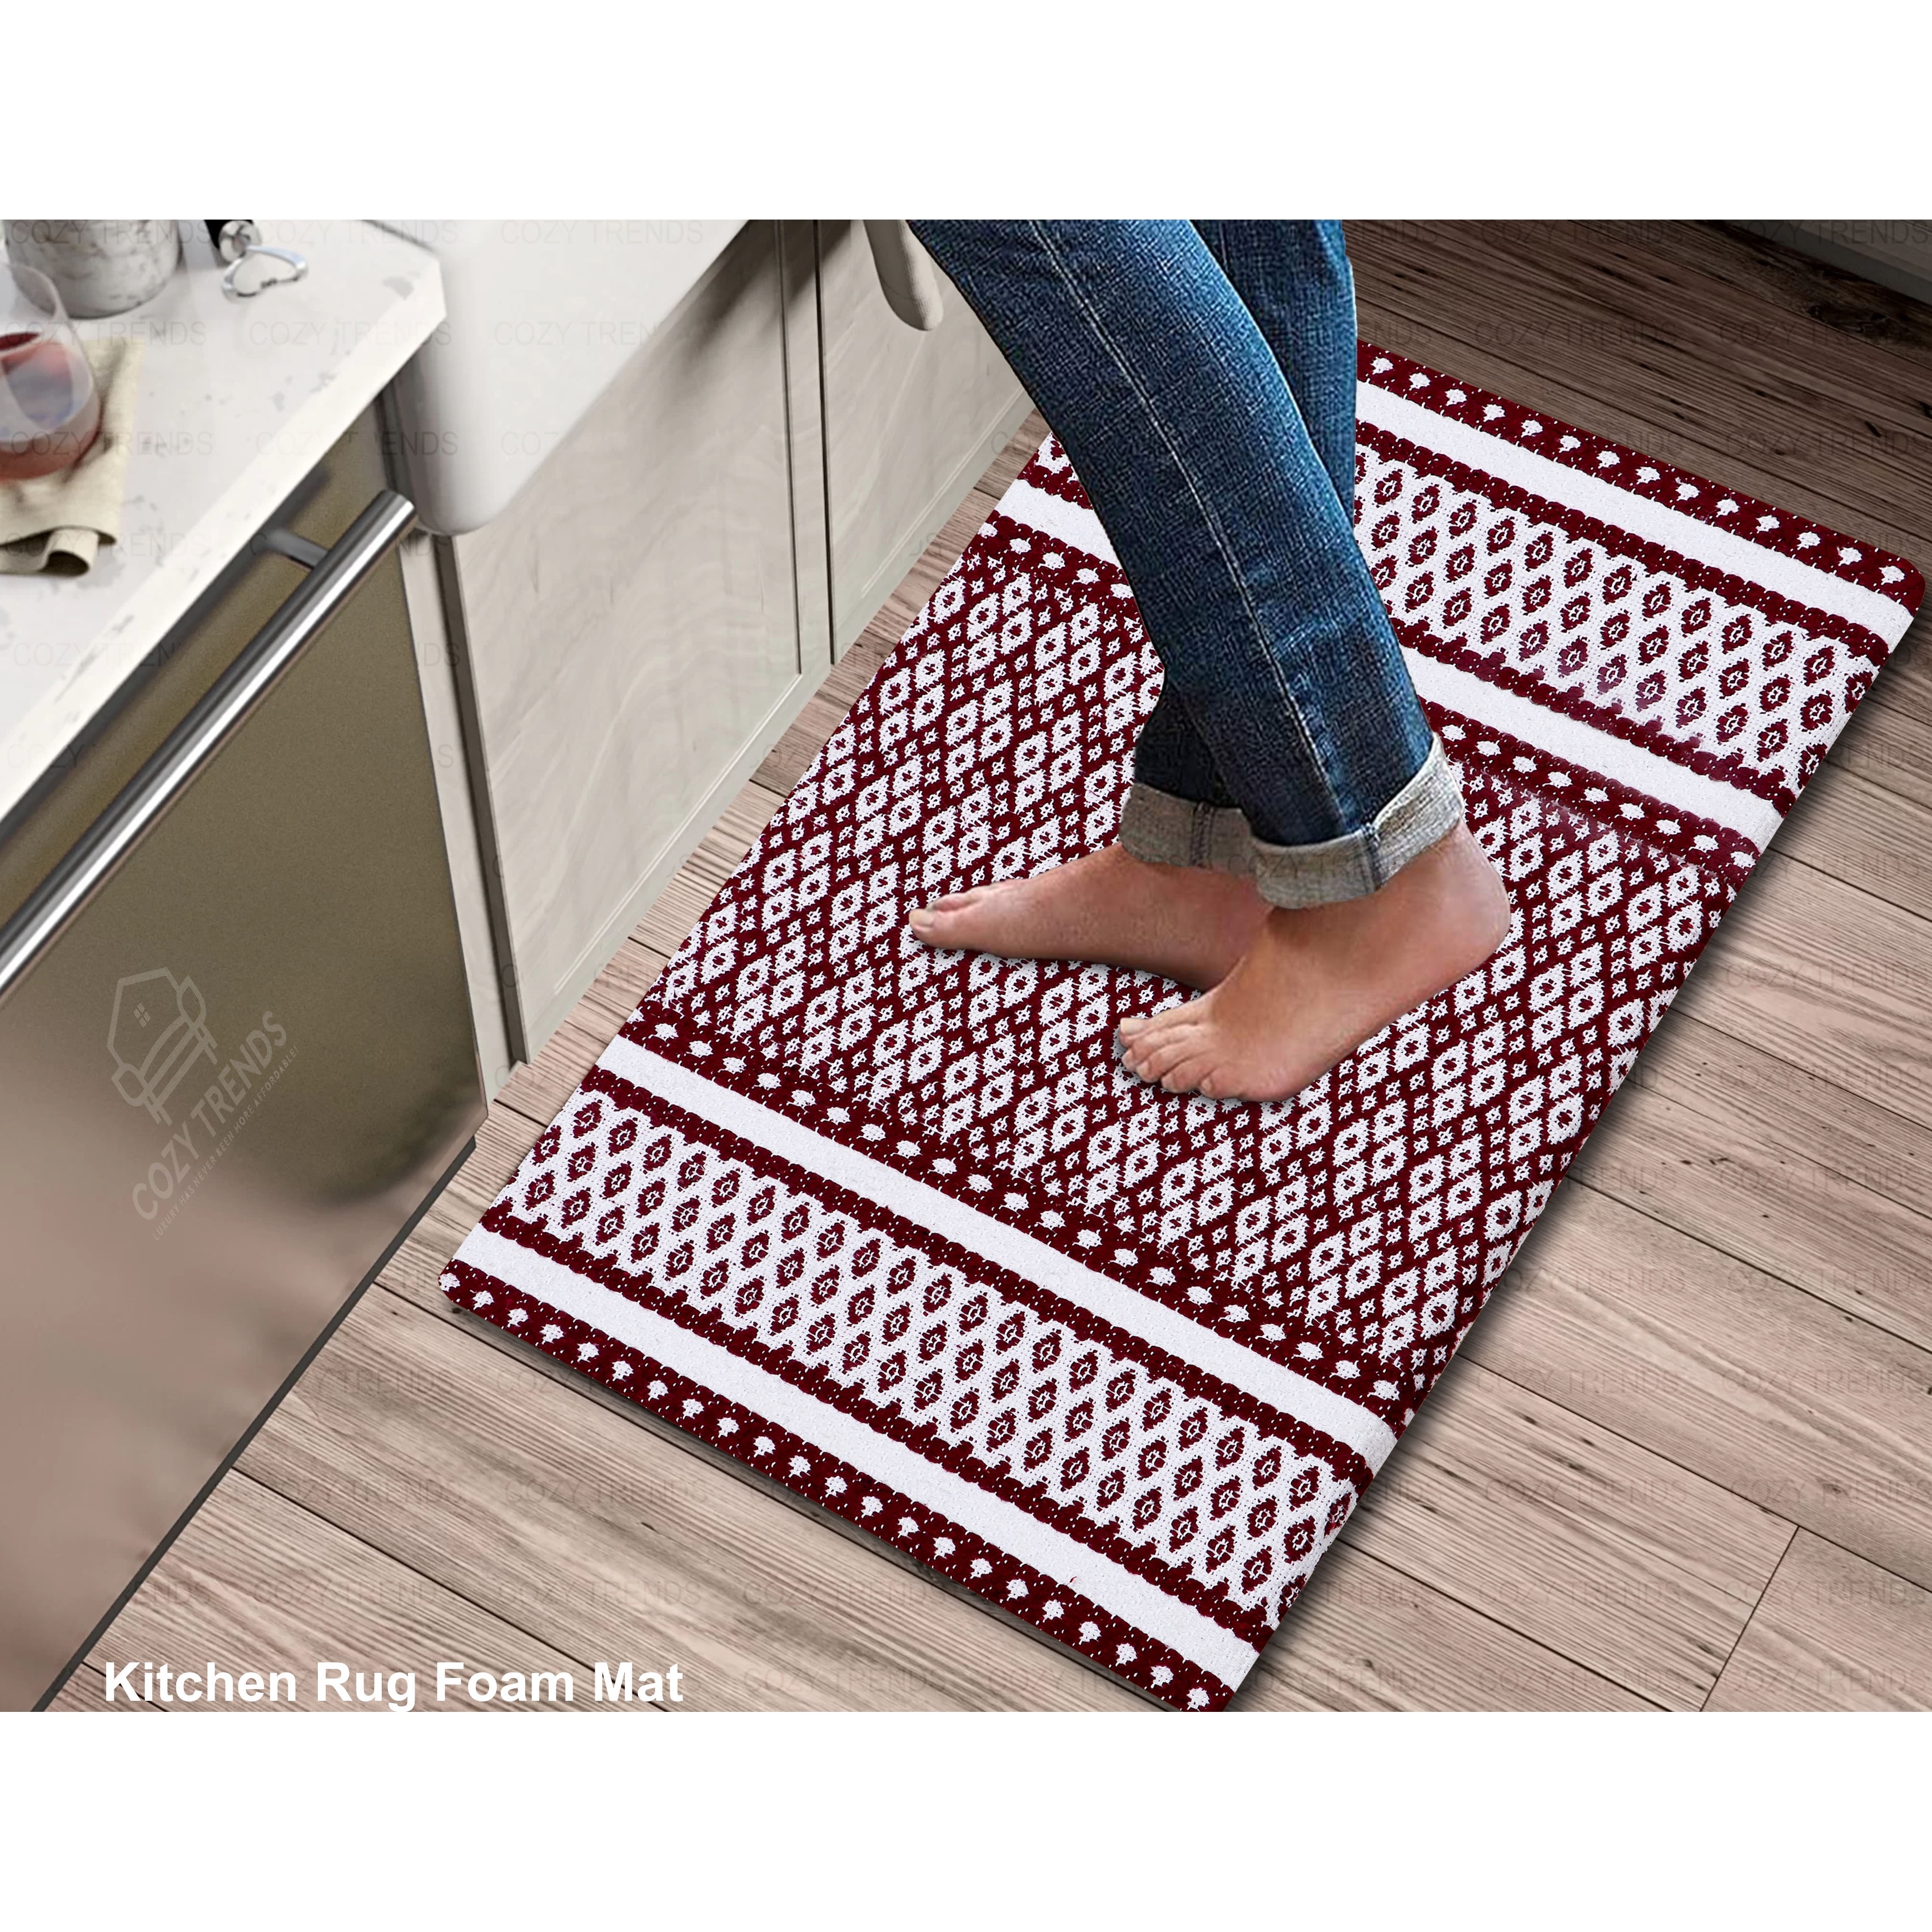 https://ak1.ostkcdn.com/images/products/is/images/direct/f313211141d7188f263ce3aa97e2526f84d670ca/Cotton-Kitchen-Mat-Cushioned-Anti-Fatigue-Rug%2C-Non-Slip-Mats-Comfort-Foam-Rug-for-Kitchen%2C-Office%2C-Sink%2C-Laundry---18%27%27x30%27%27.jpg